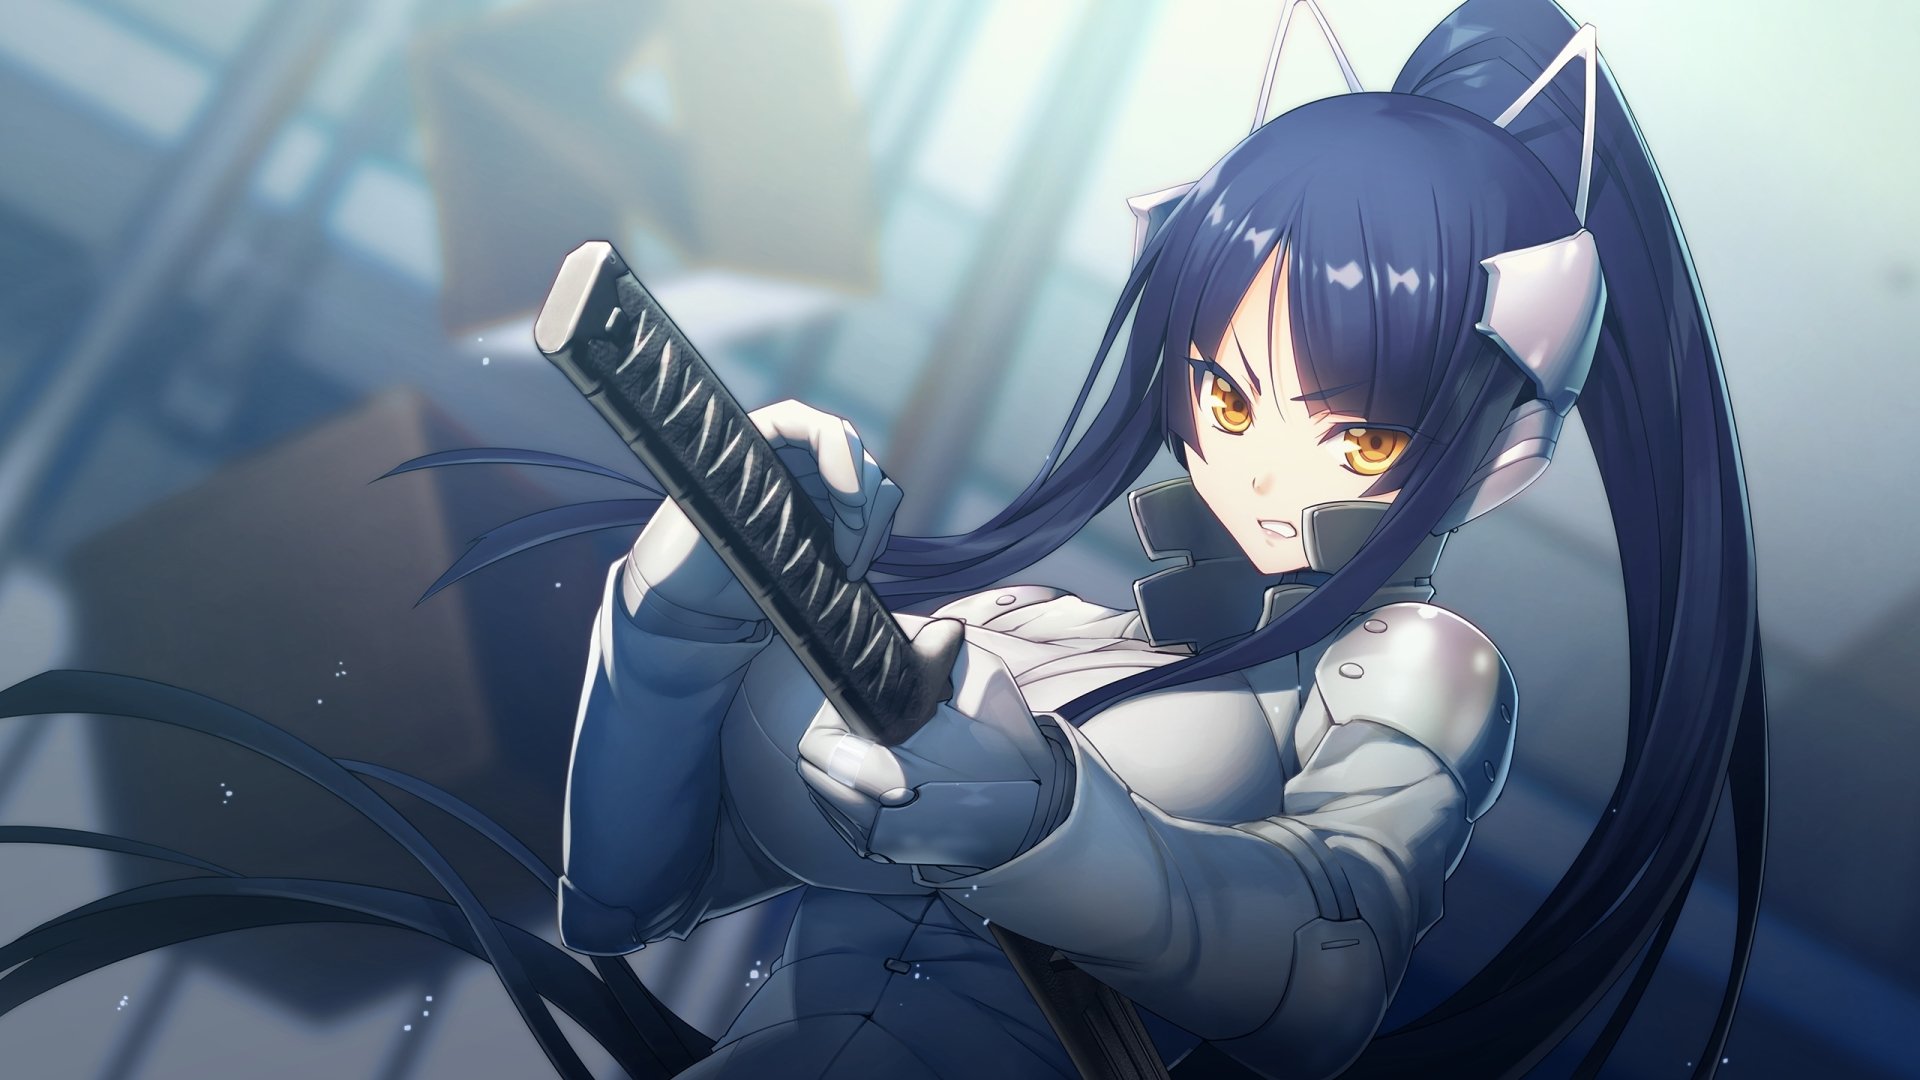 Anime Anime Girls Sword Women With Swords Yellow Eyes Long Hair Purple Hair Angry Face Weapon Tokyo  1920x1080